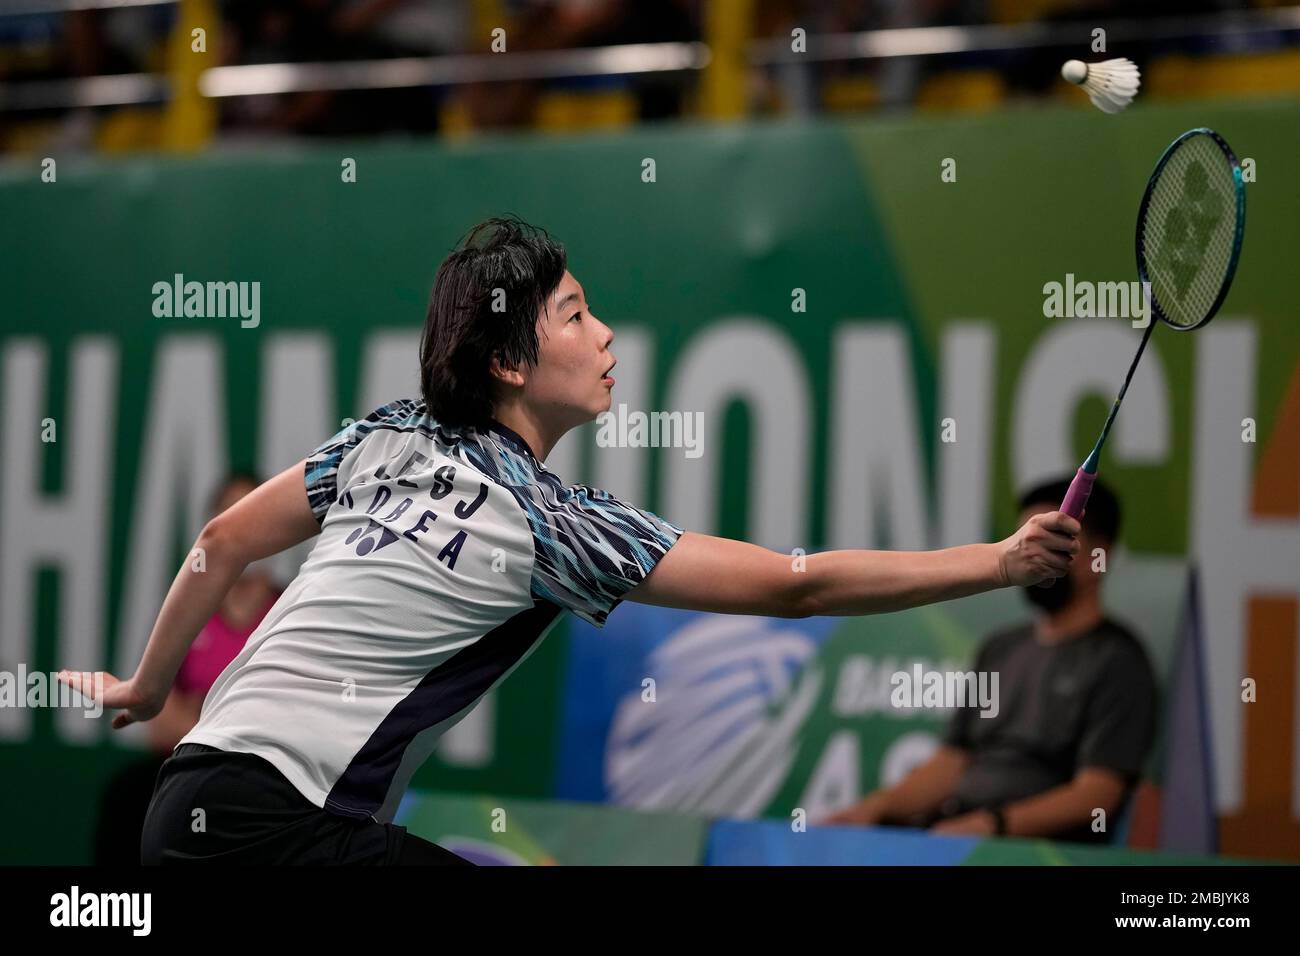 Lee Seo Jin of South Korea returns a shot against Saloni Samirbhai Mehta from Hong Kong during the womenÅfs singles qualification round of the Badminton Asia Championships at Muntinlupa, Philippines in Tuesday,